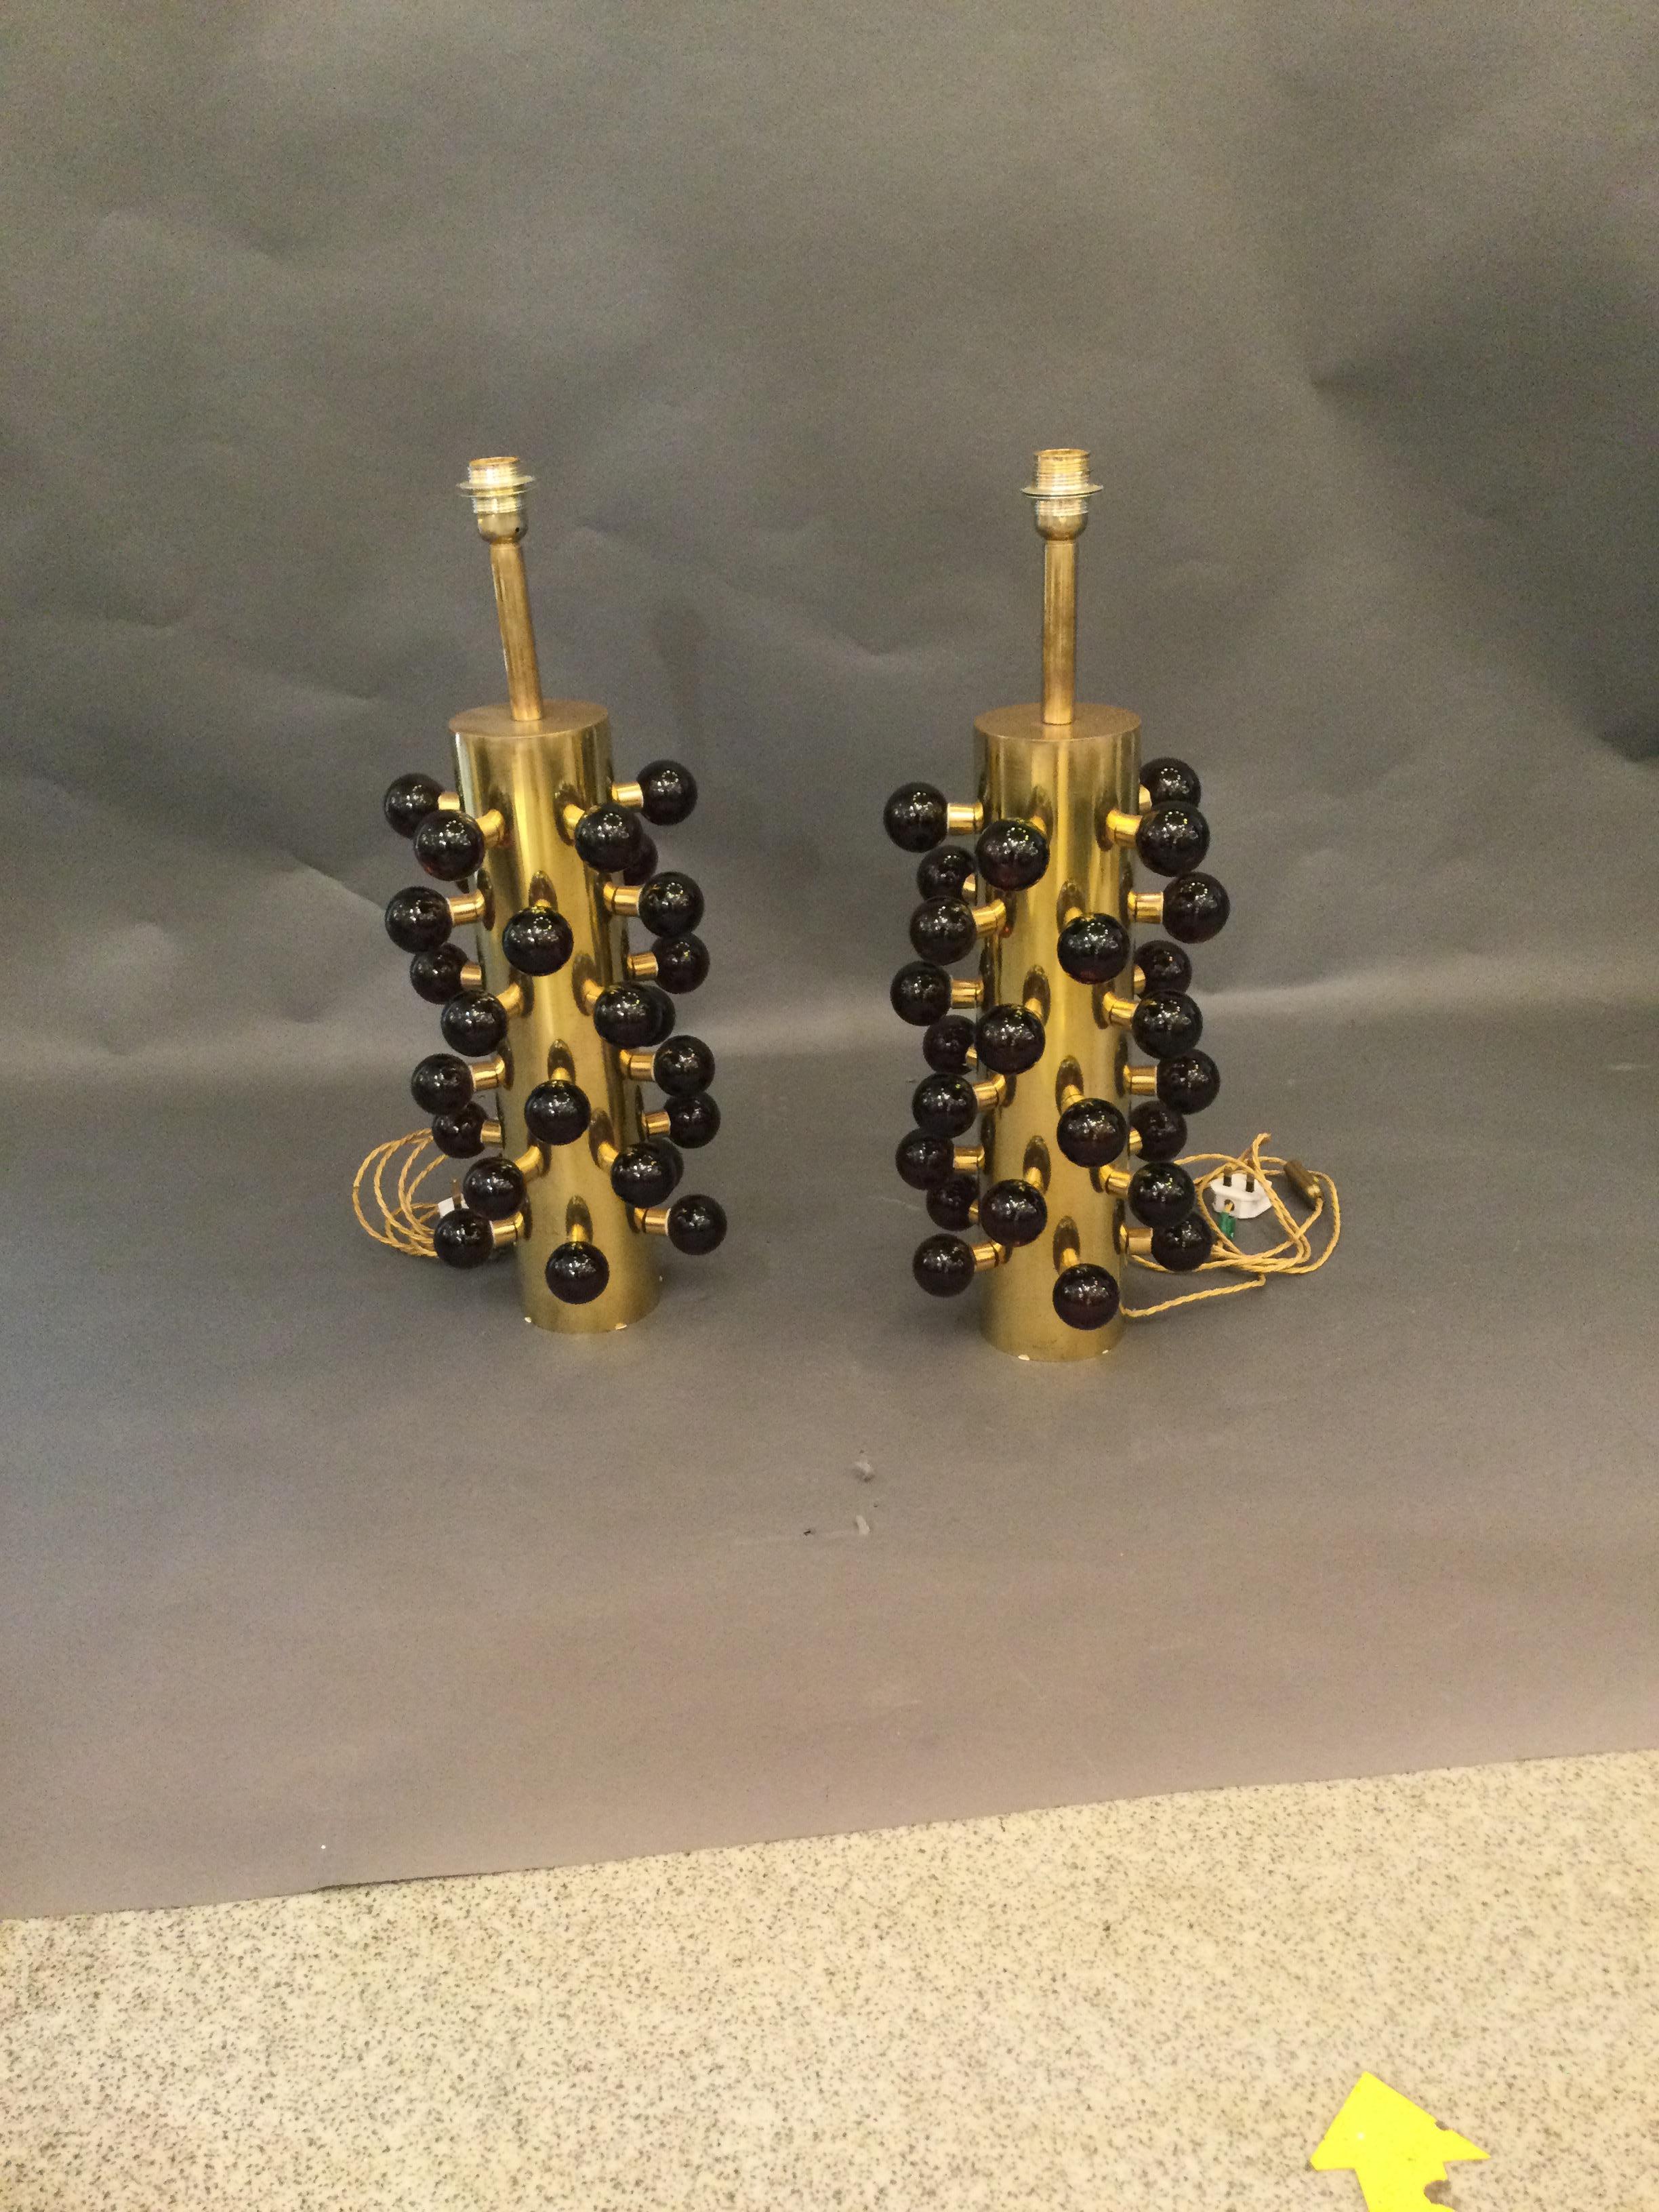 Pair of table lamps made of brass body and decorative murano glass spheres attached all over the lamps.